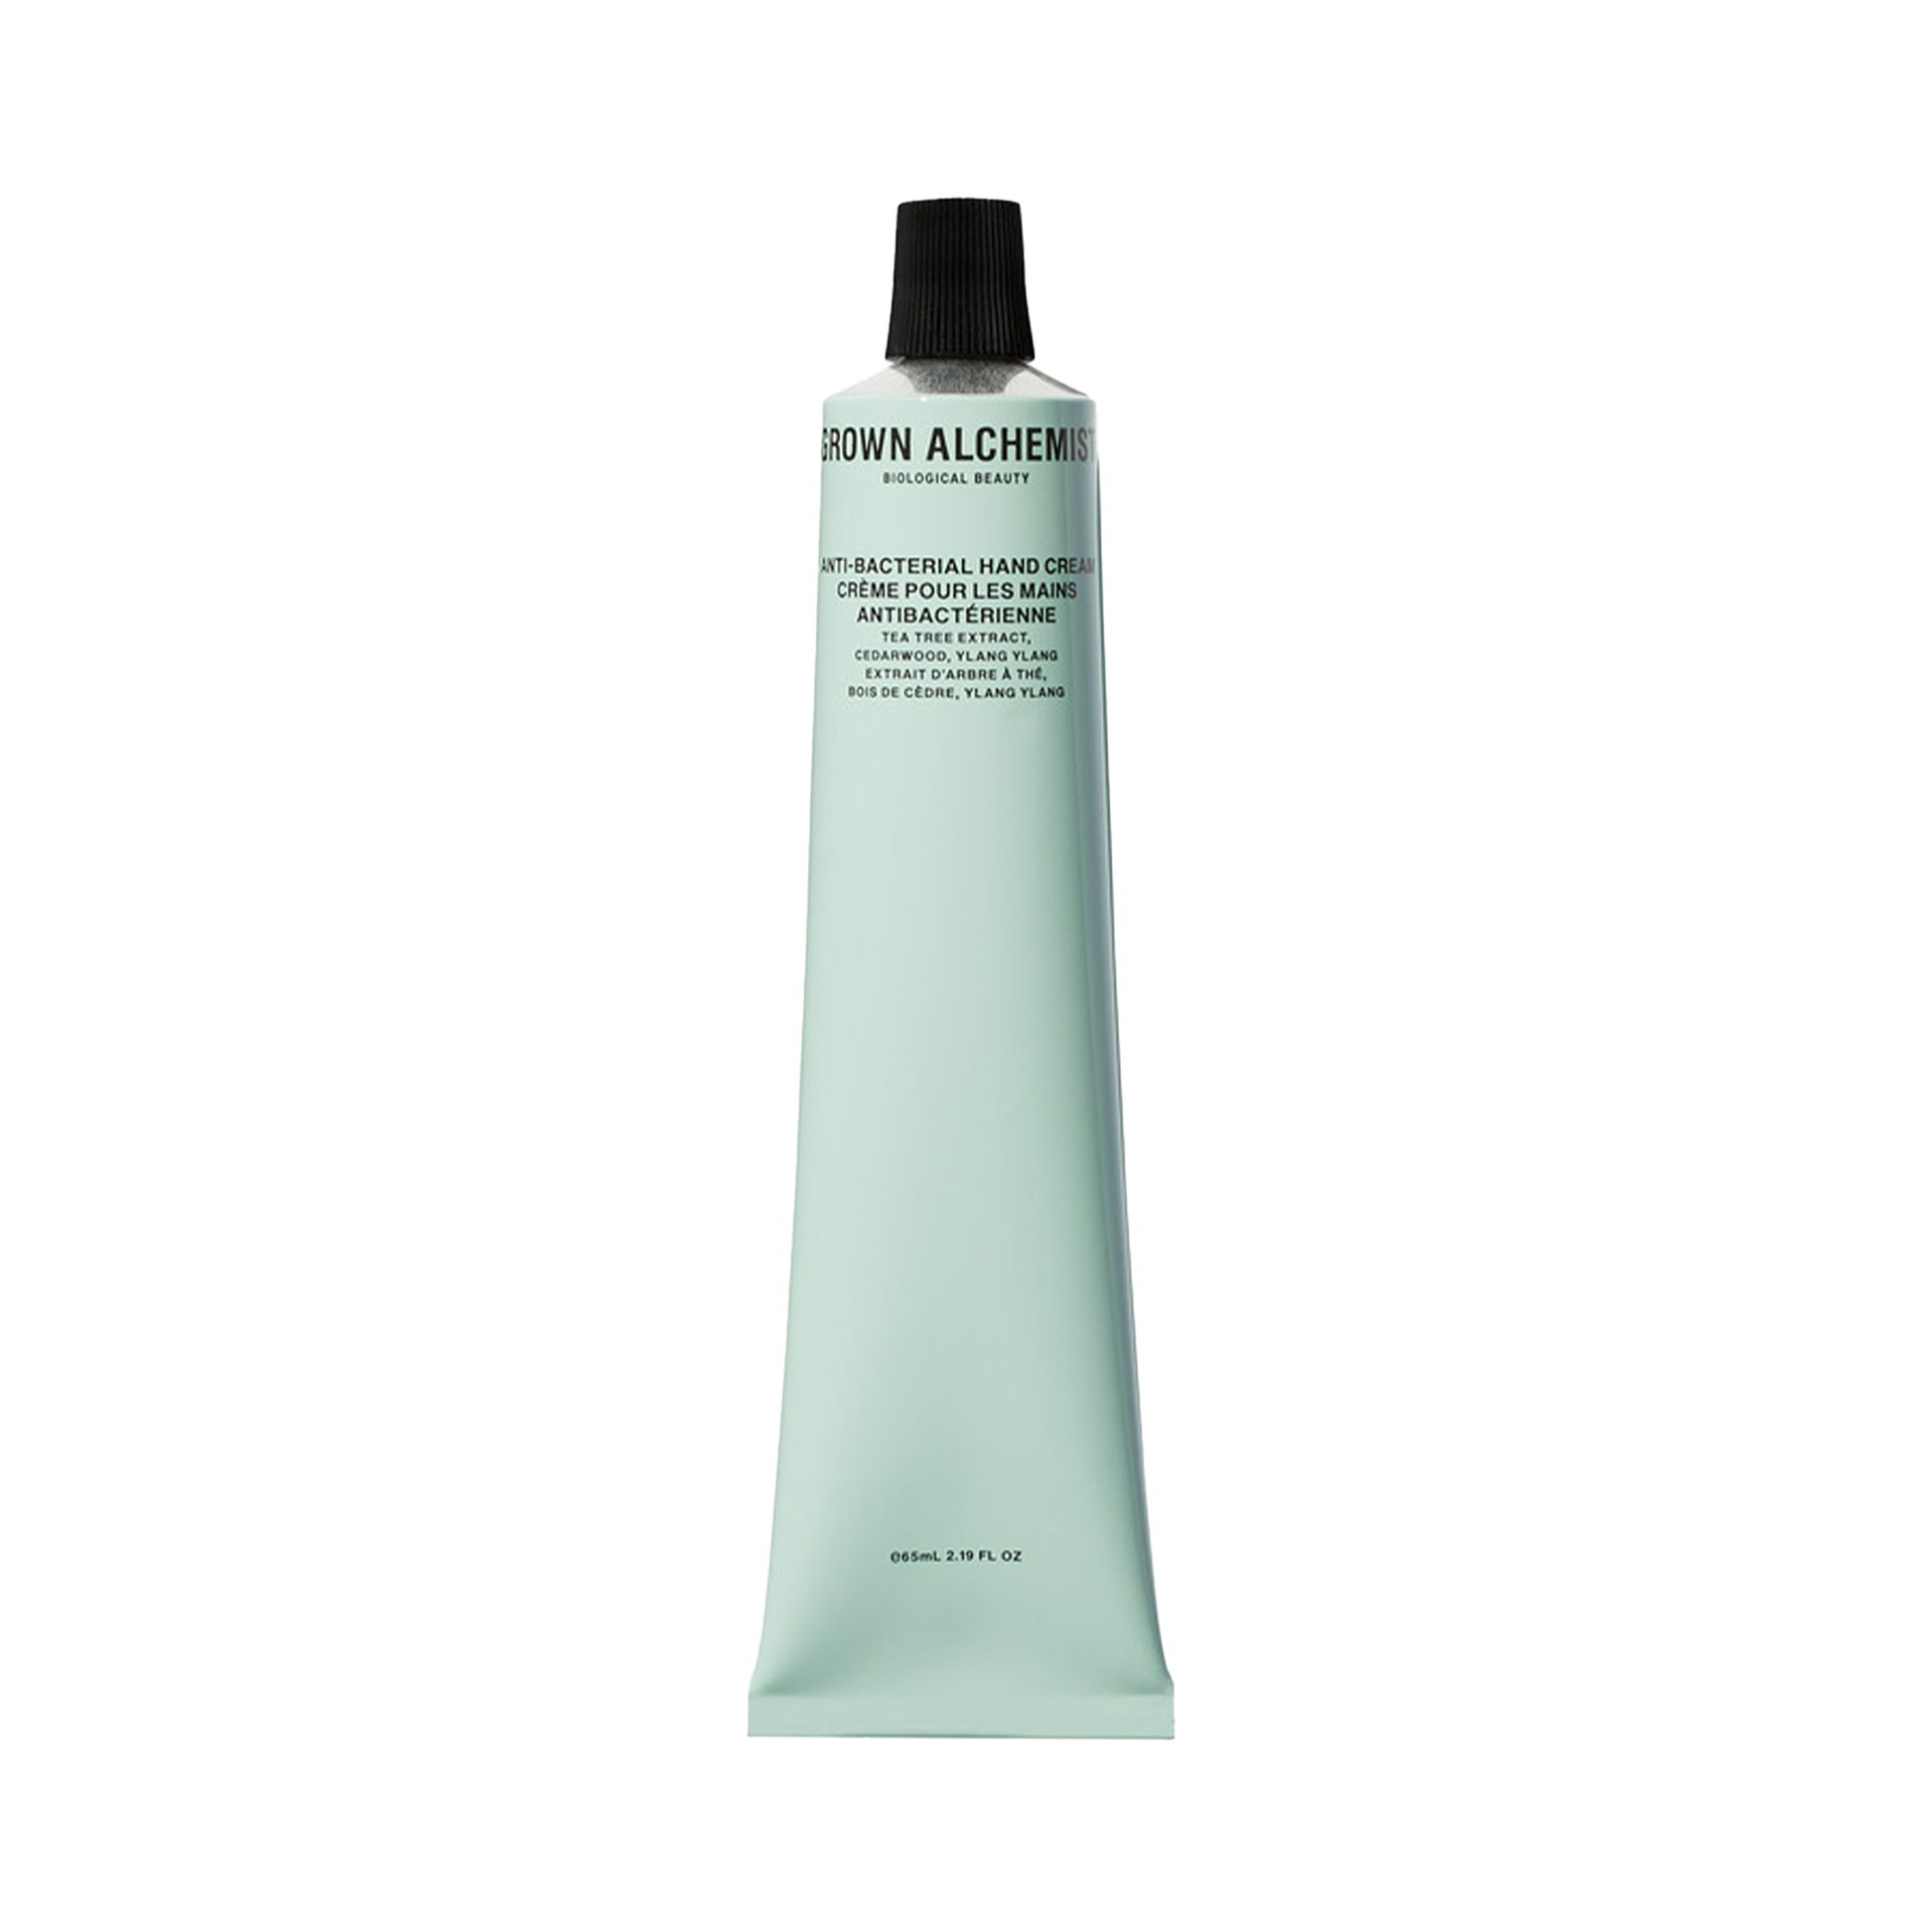 Grown Alchemist Anti-Bacterial Hand Cream: An innovative, non-greasy hand cream, formulated with anti-bacterial and soothing ingredients to deeply hydrate hands and cuticles, while leaving them softly scented.